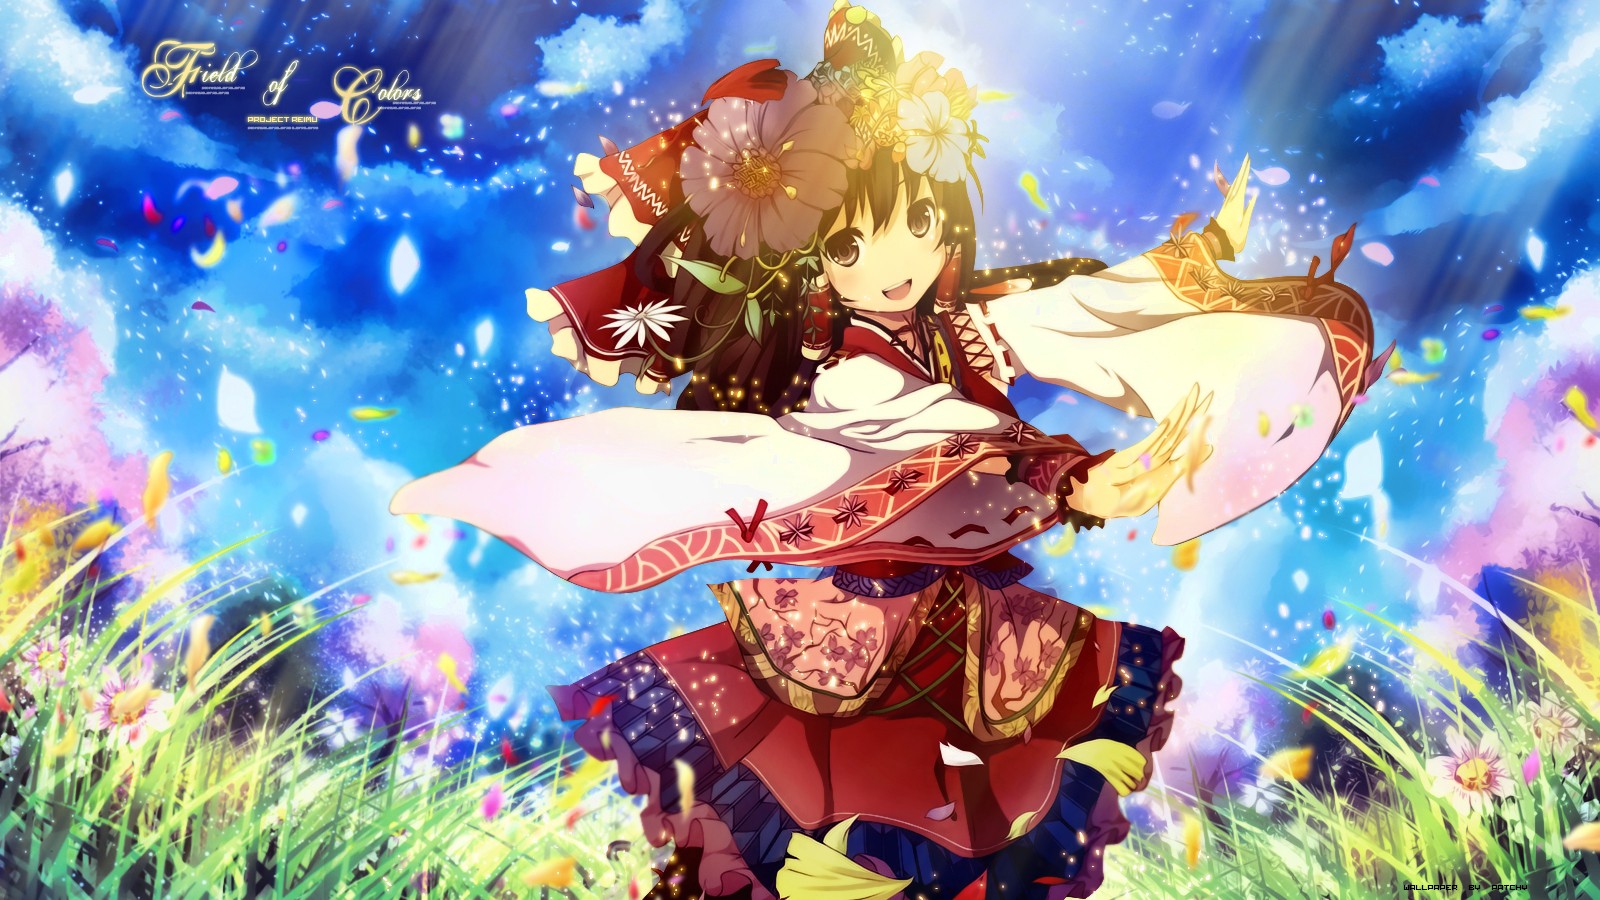 brunettes, Video, Games, Clouds, Nature, Touhou, Cherry, Blossoms, Trees, Multicolor, Flowers, Happy, Text, Grass, Long, Hair, Brown, Eyes, Miko, Alternate, Sunlight, Hakurei, Reimu, Smiling, Bows, Traditional, Wallpaper